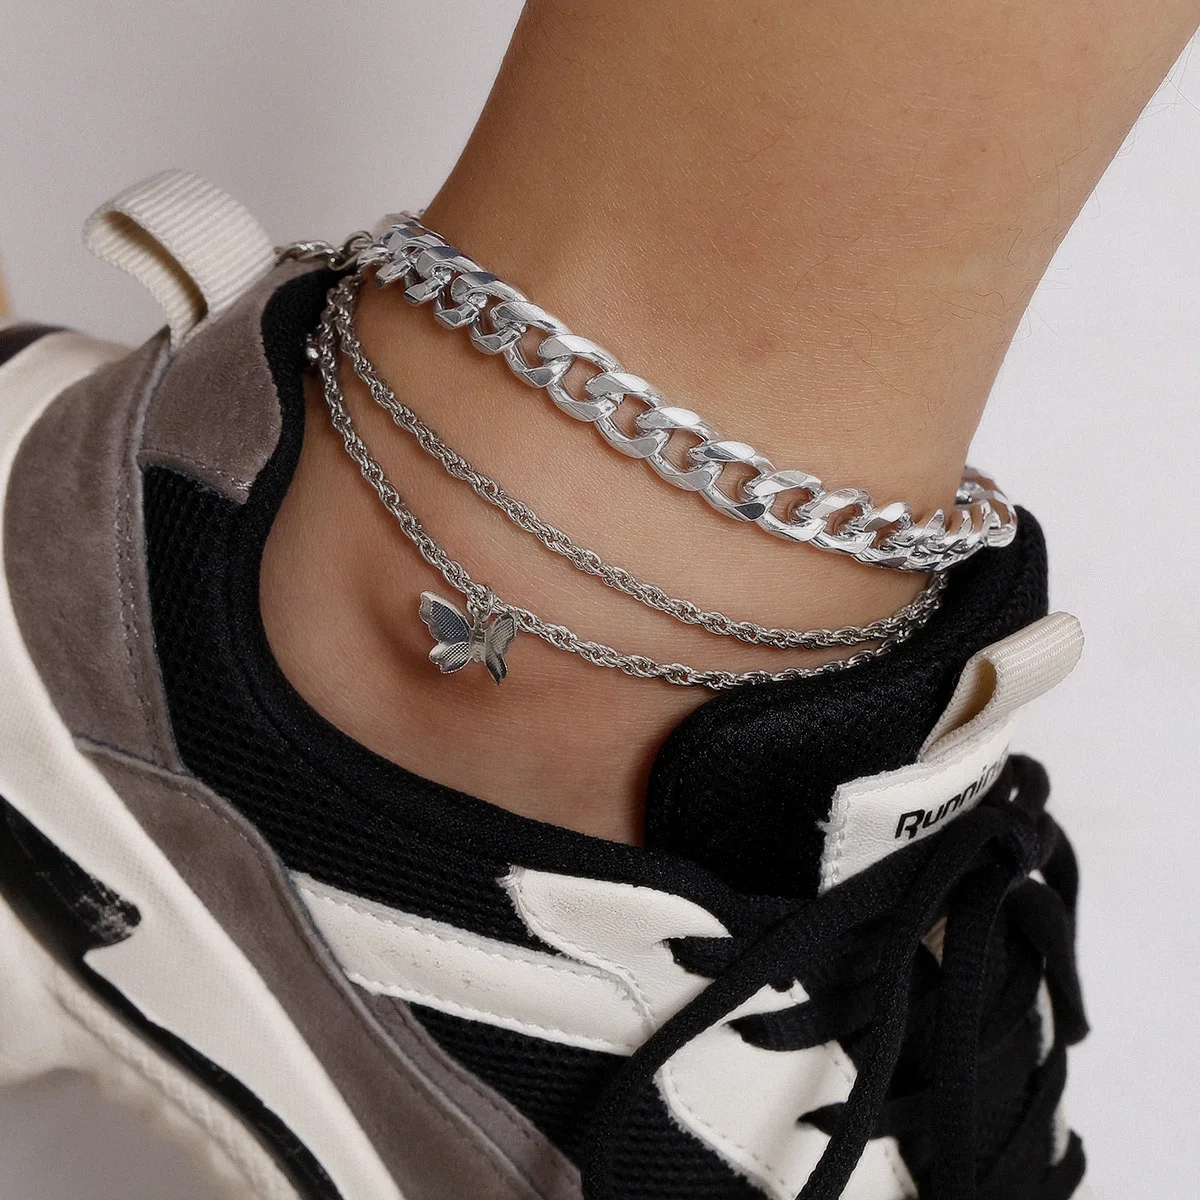 
2020Fashion Jewelry Beach Butterfly Ankle Bracelets Adjustable Anklets Foot Chain Rope Ankle Bracelet For Women Girls 